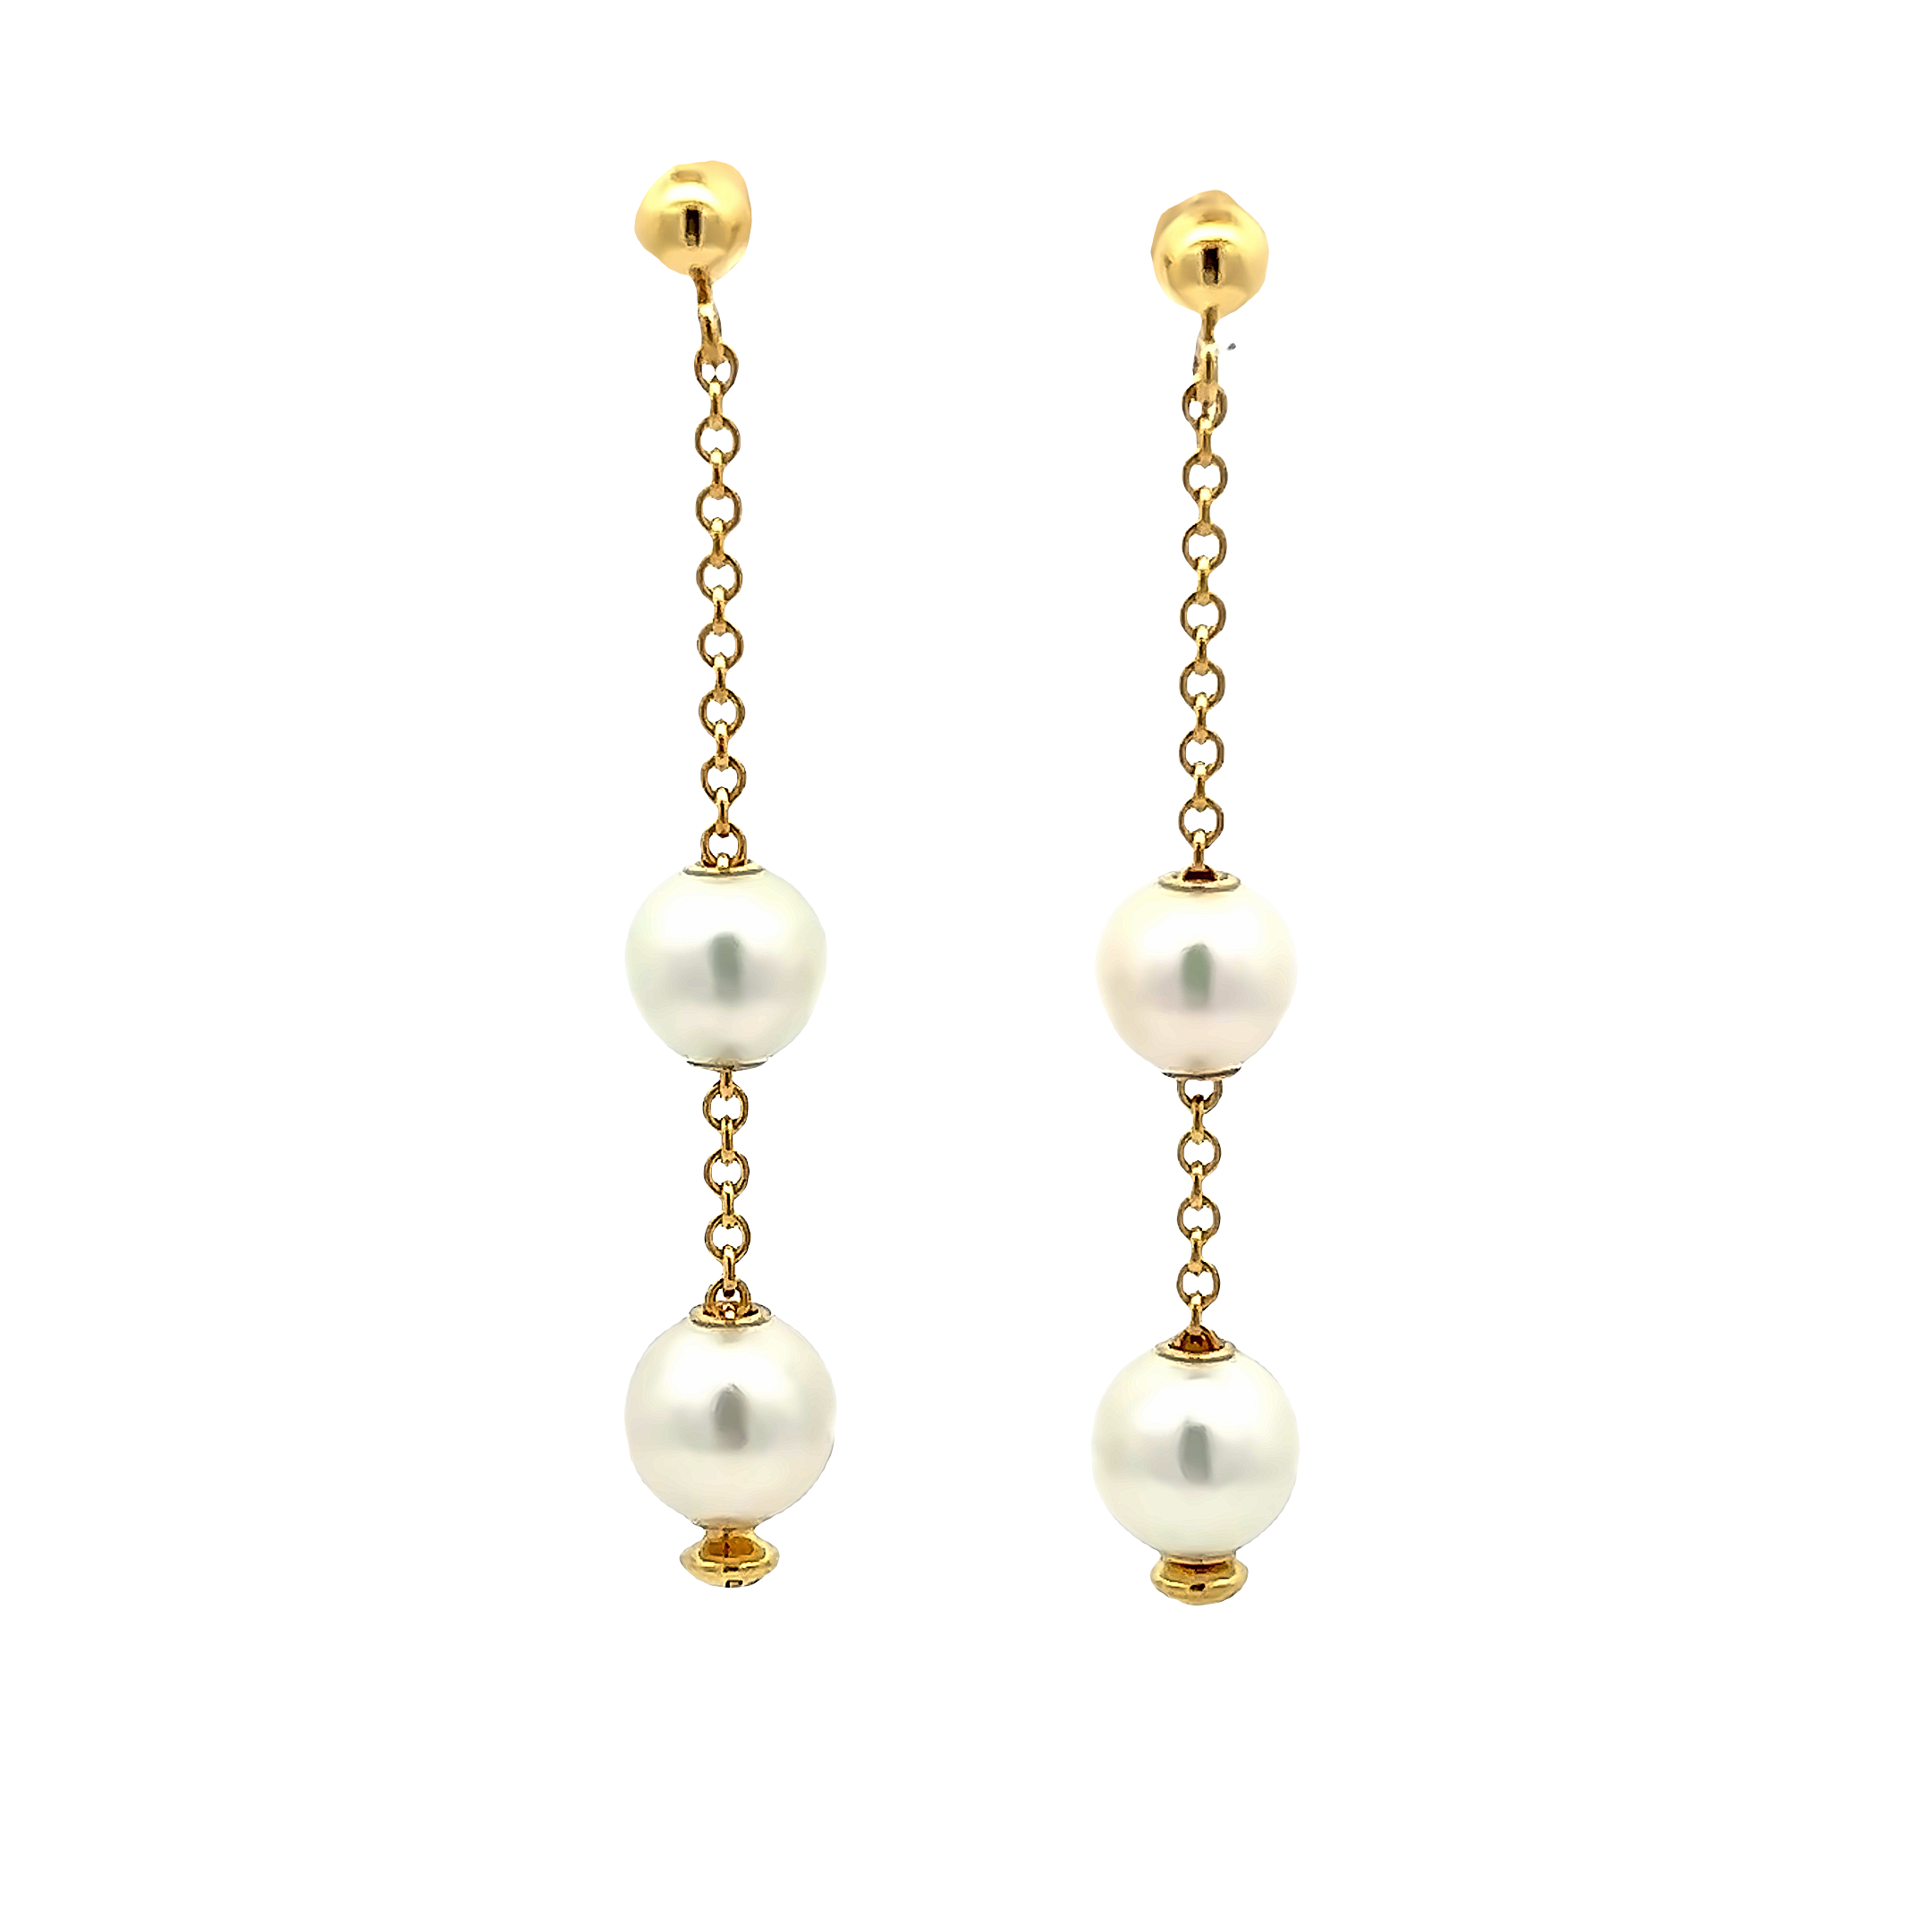 18 Karat yellow gold dangle earrings with 4= Cultured Pearls